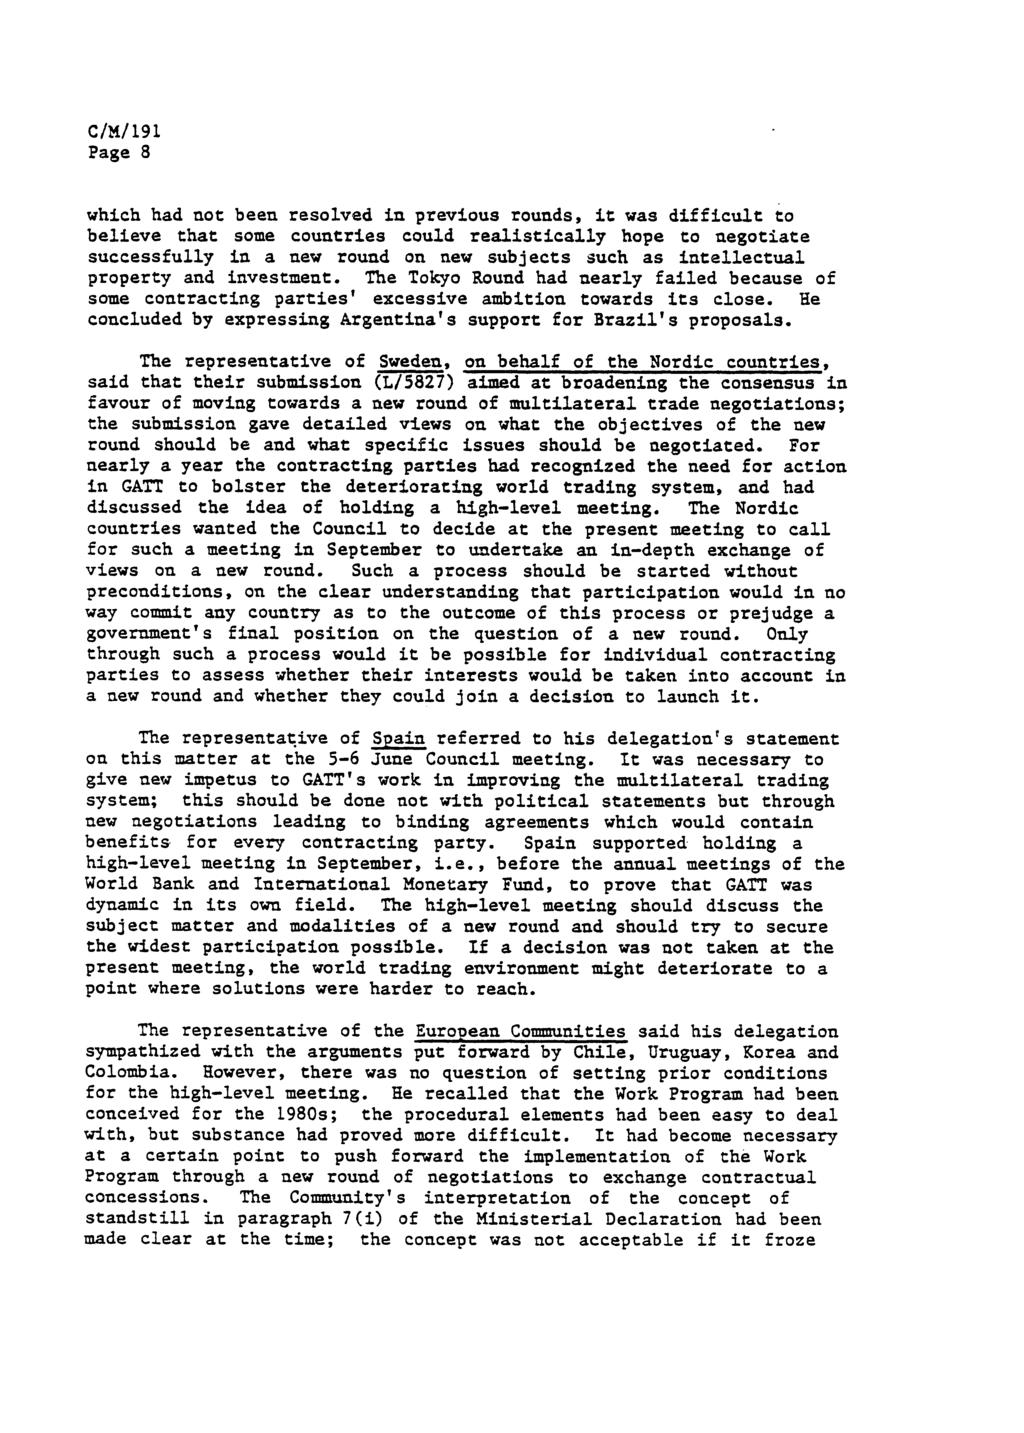 Page 8 which had not been resolved in previous rounds, it was difficult to believe that some countries could realistically hope to negotiate successfully in a new round on new subjects such as